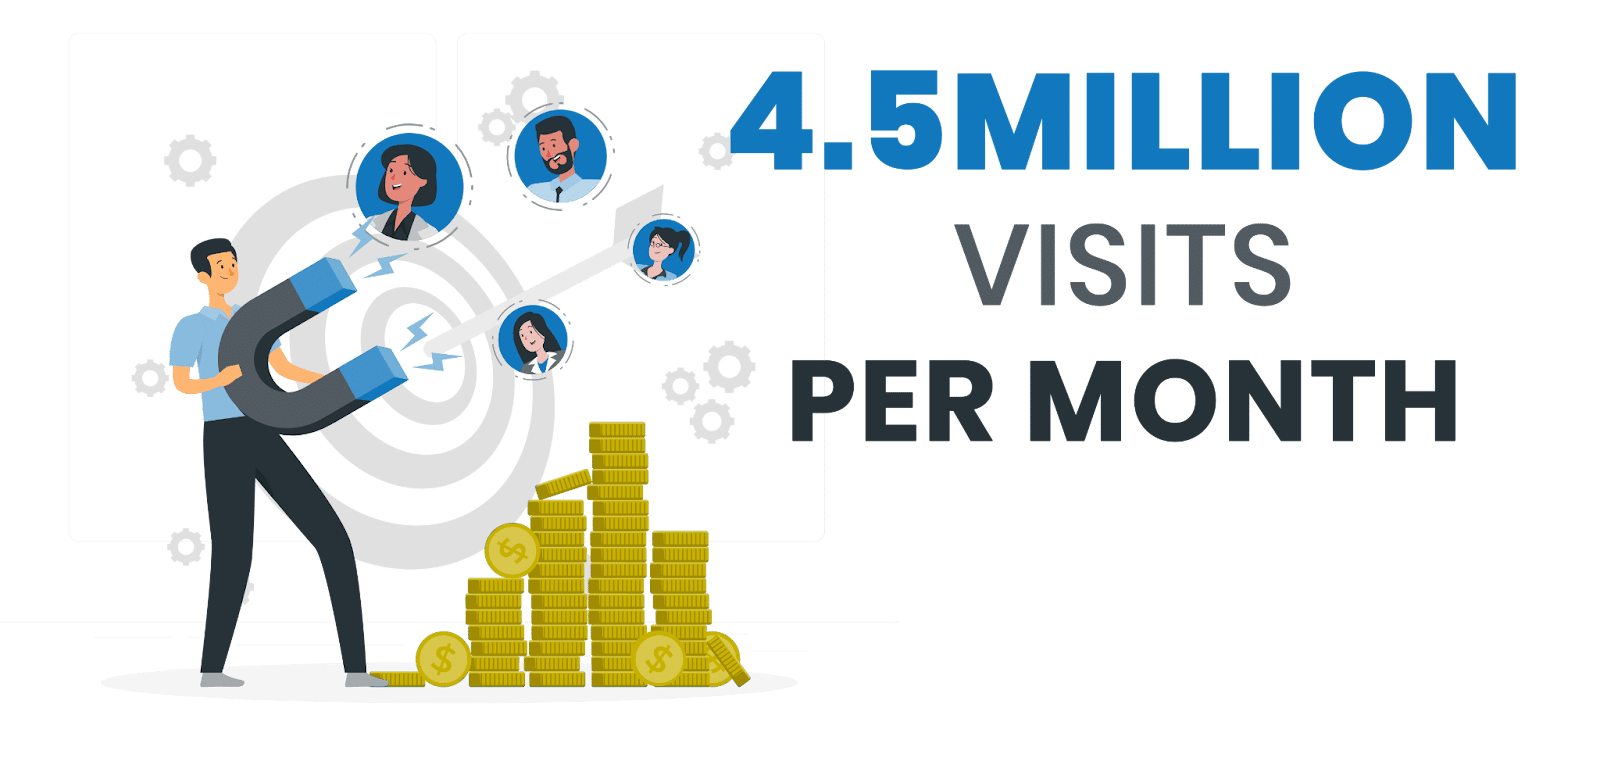 Statistics with 4.5 Million visits per month